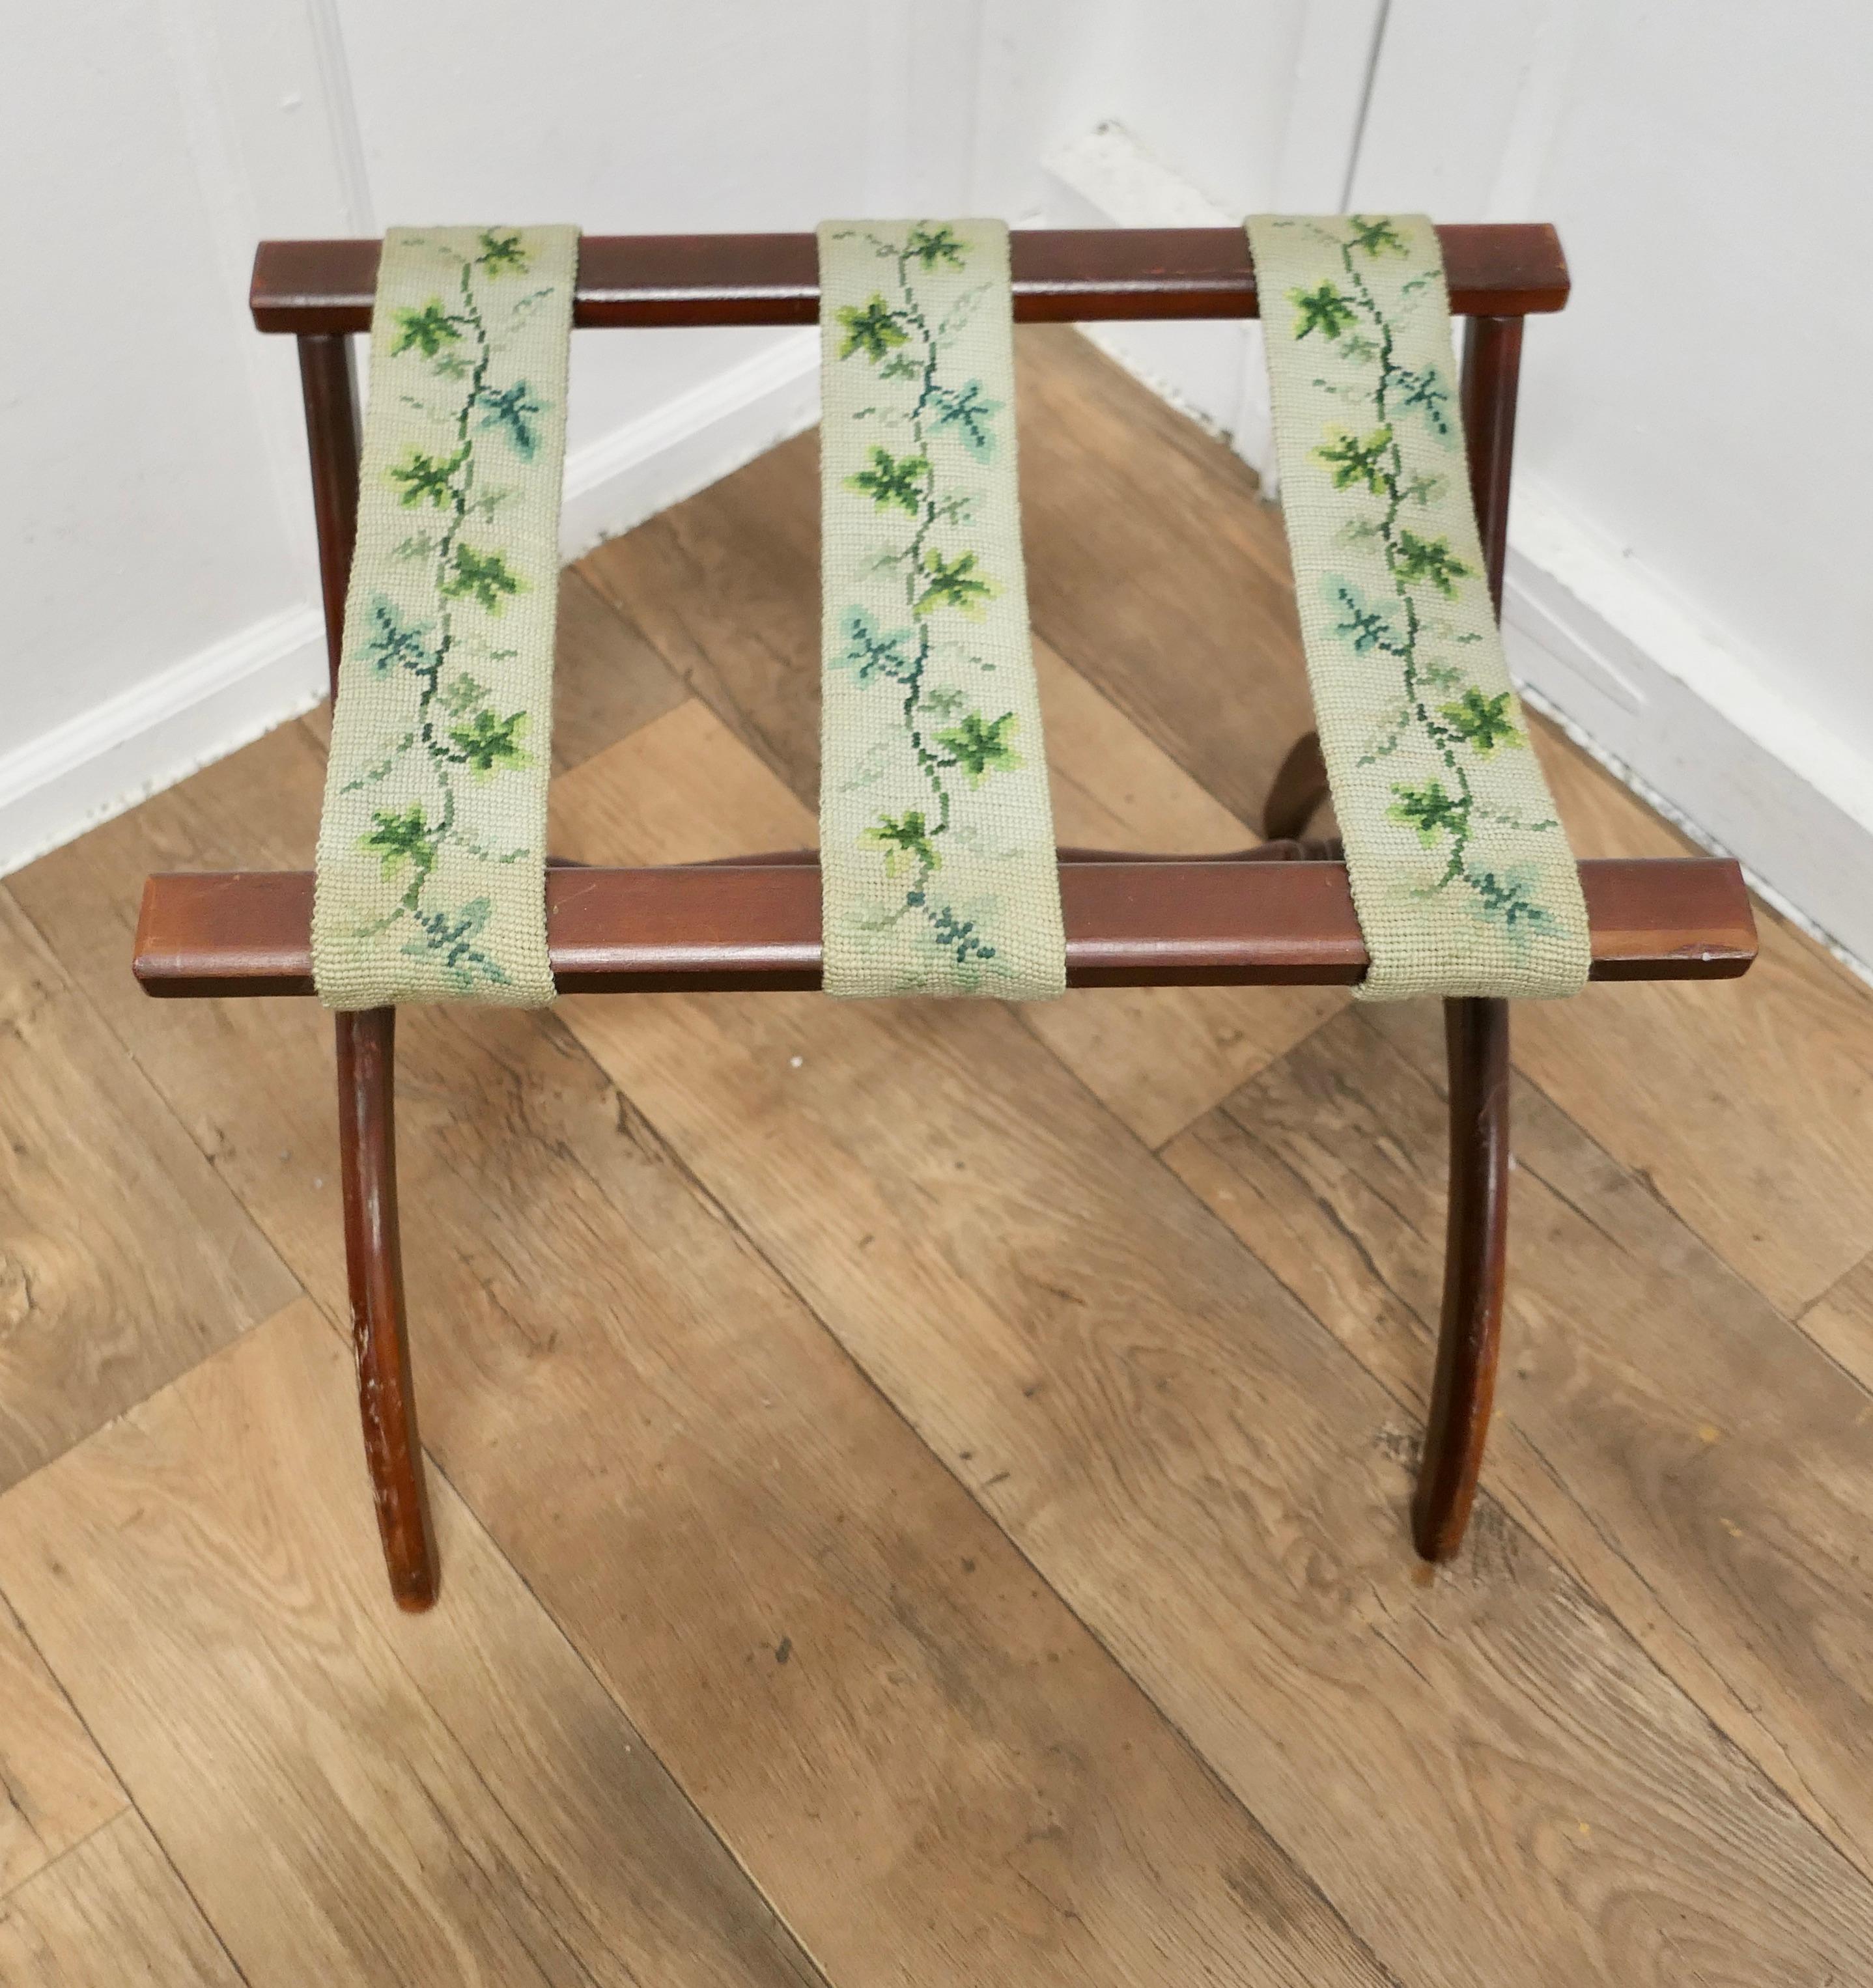 Folk Art Folding X Frame Luggage Rack

This is a good sturdy piece, it is made in beech and has a tough petite point embroidered webbing forming the top platform, the stand is robust and strong
The rack is 22” long, 15” wide and it is 19” high
SC101
